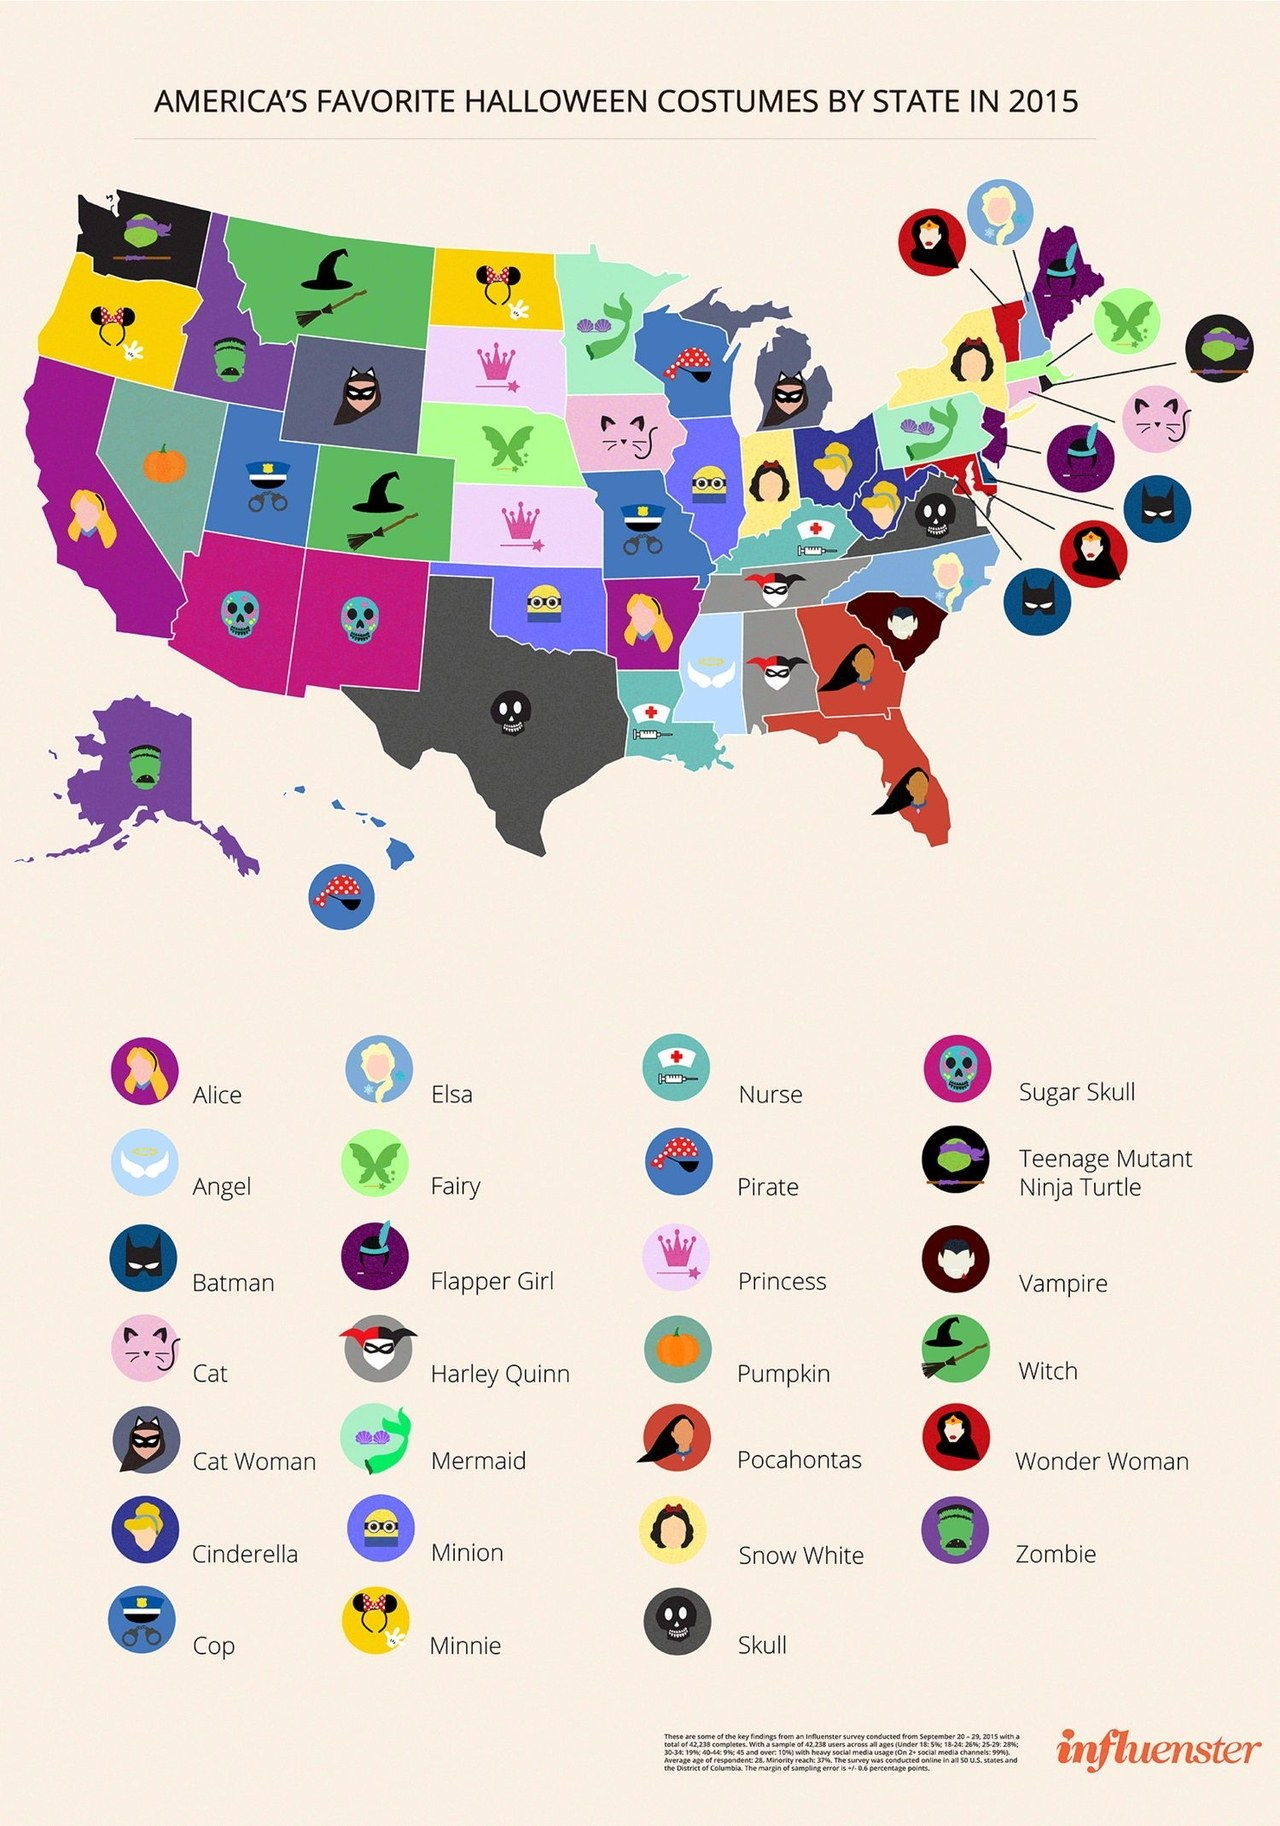 Halloween costumes by state